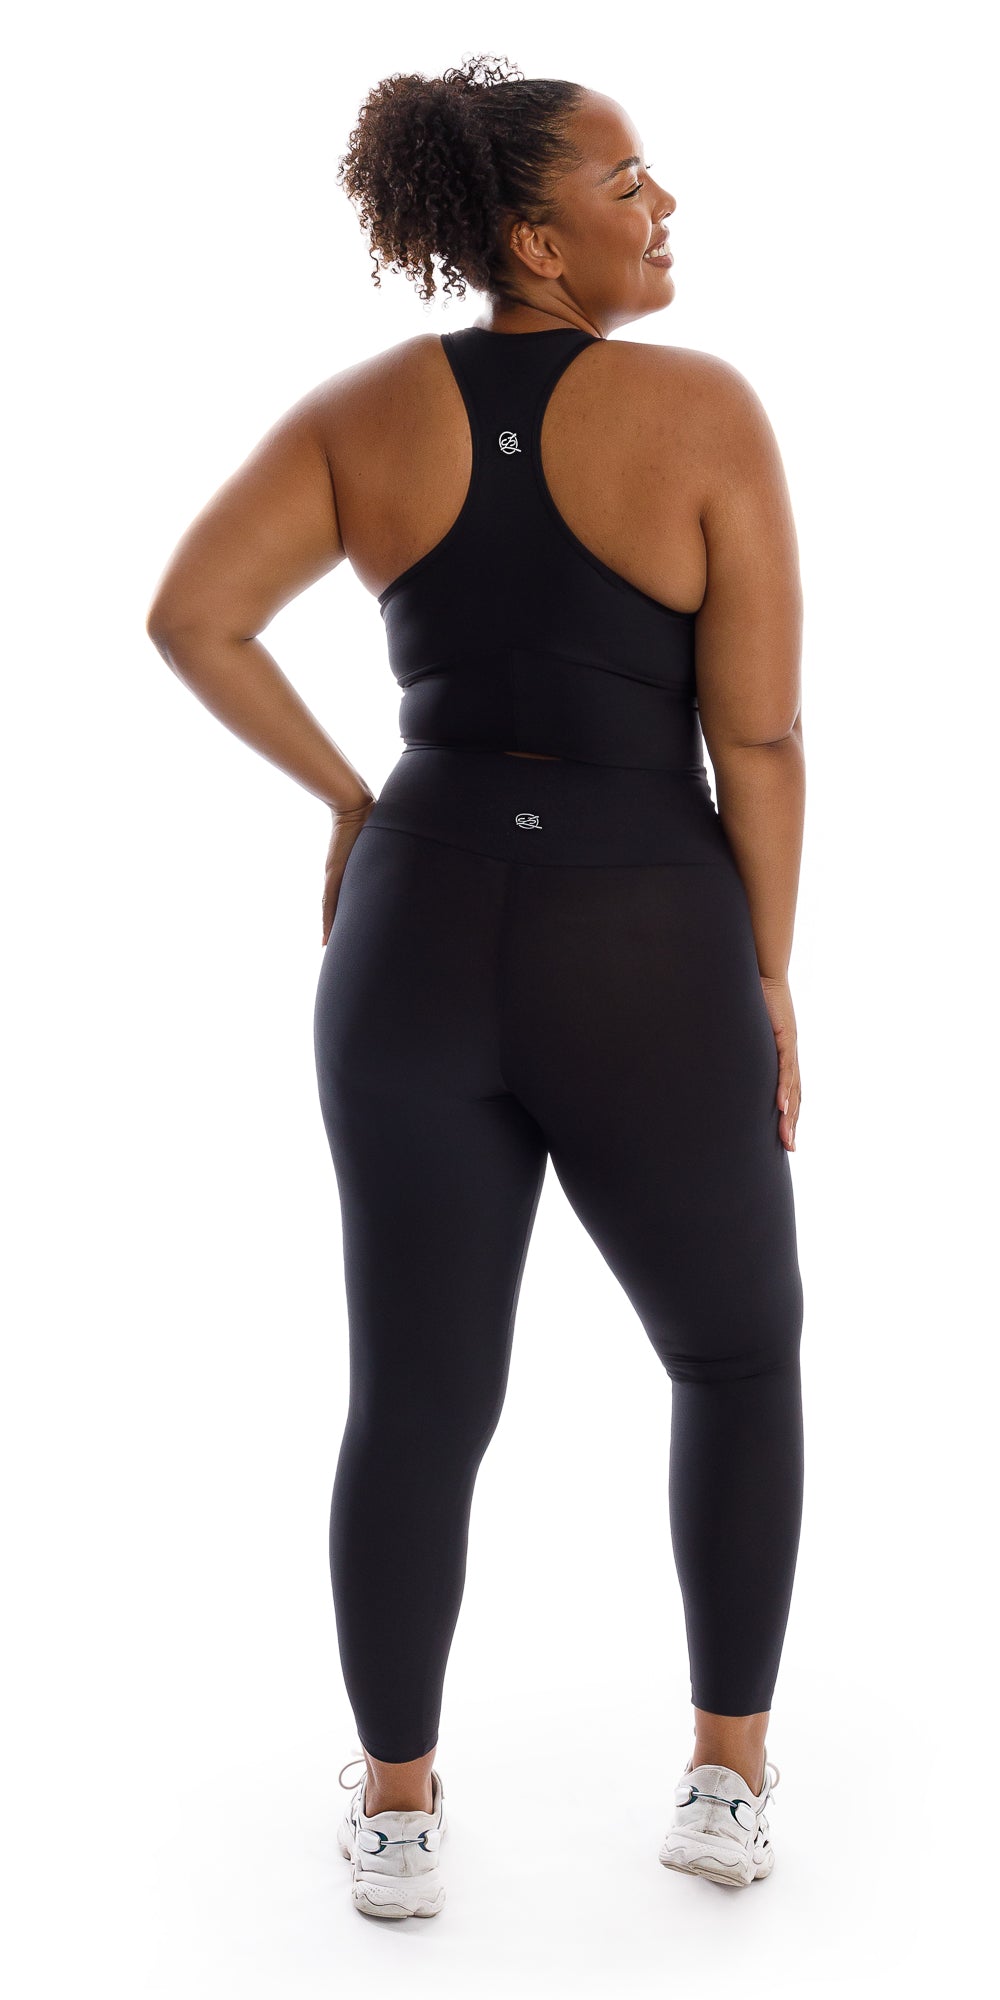 Full body rear view of girl wearing black Midnight Eco Racer Back Bra and matching leggings putting one hand on waist